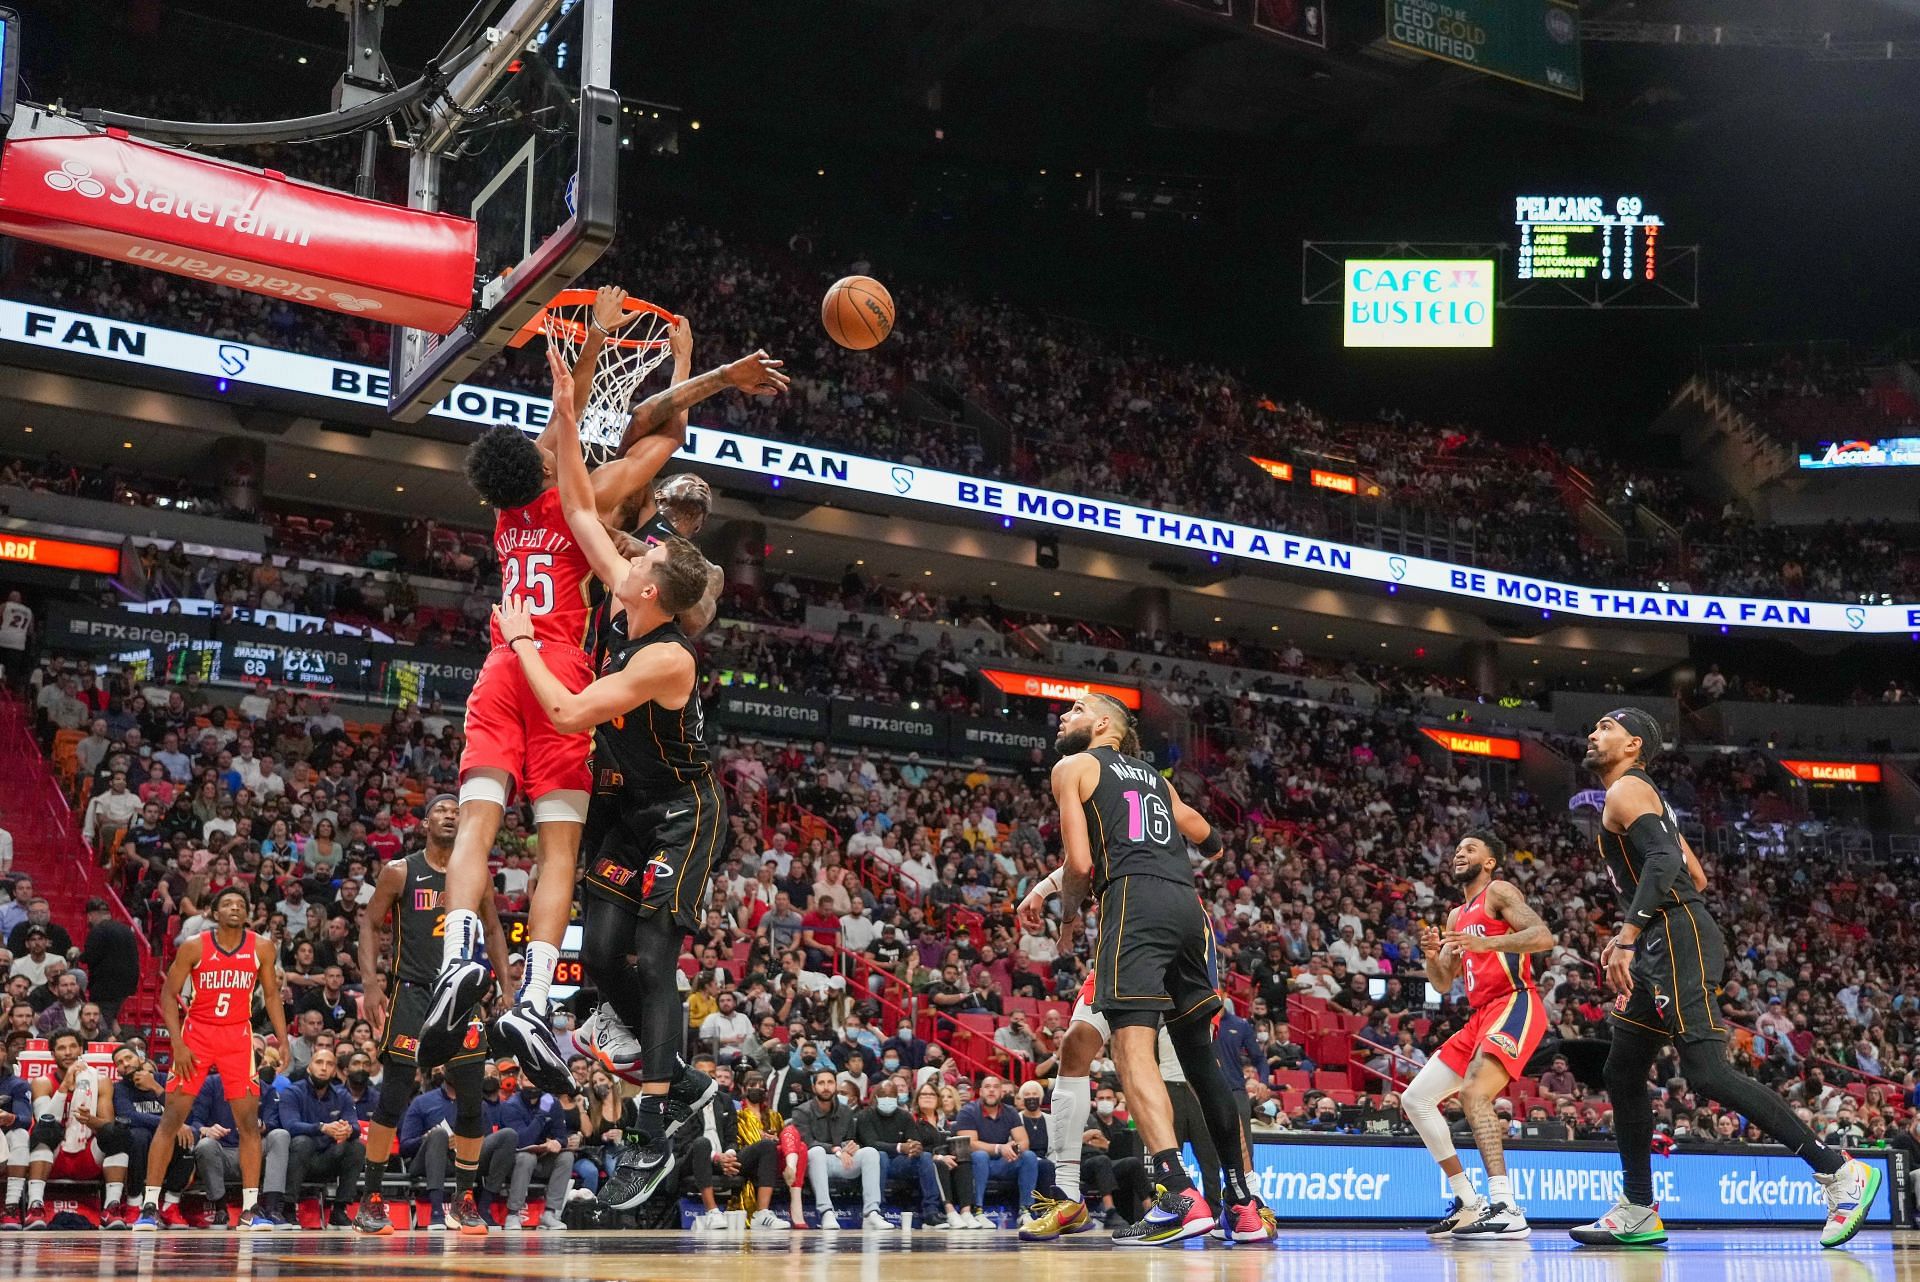 The New Orleans Pelicans will host the Miami Heat on February 10.